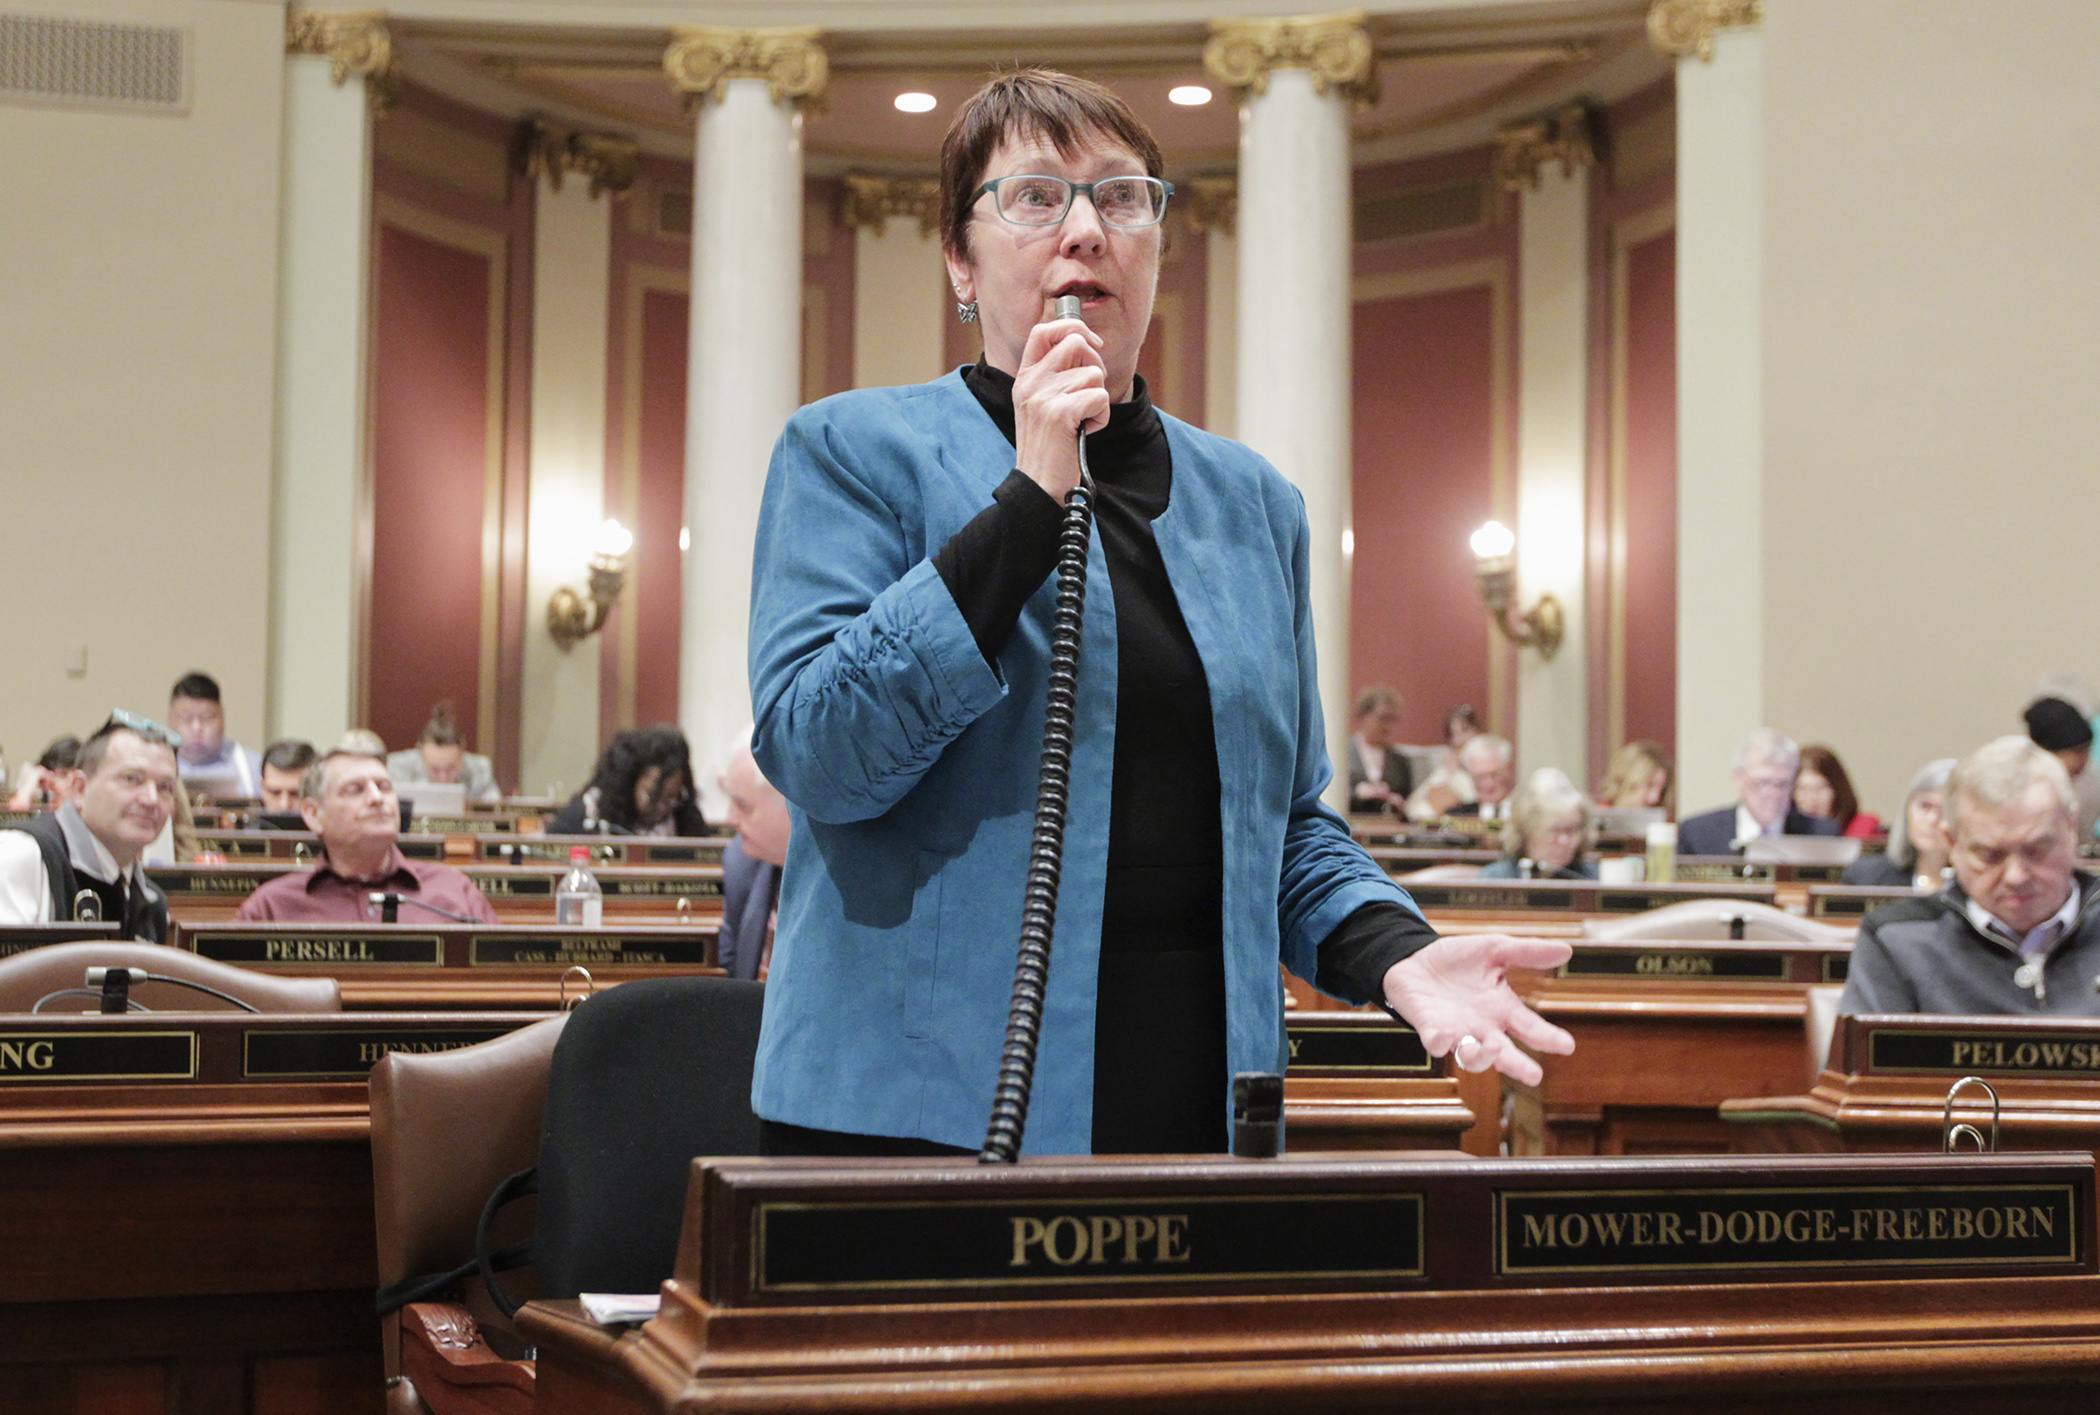 Rep. Jeanne Poppe, chair of the House Agriculture and Food Finance and Policy Division, describes provisions of the omnibus agriculture, food and housing finance bill during the April 26 floor debate. Photo by Paul Battaglia